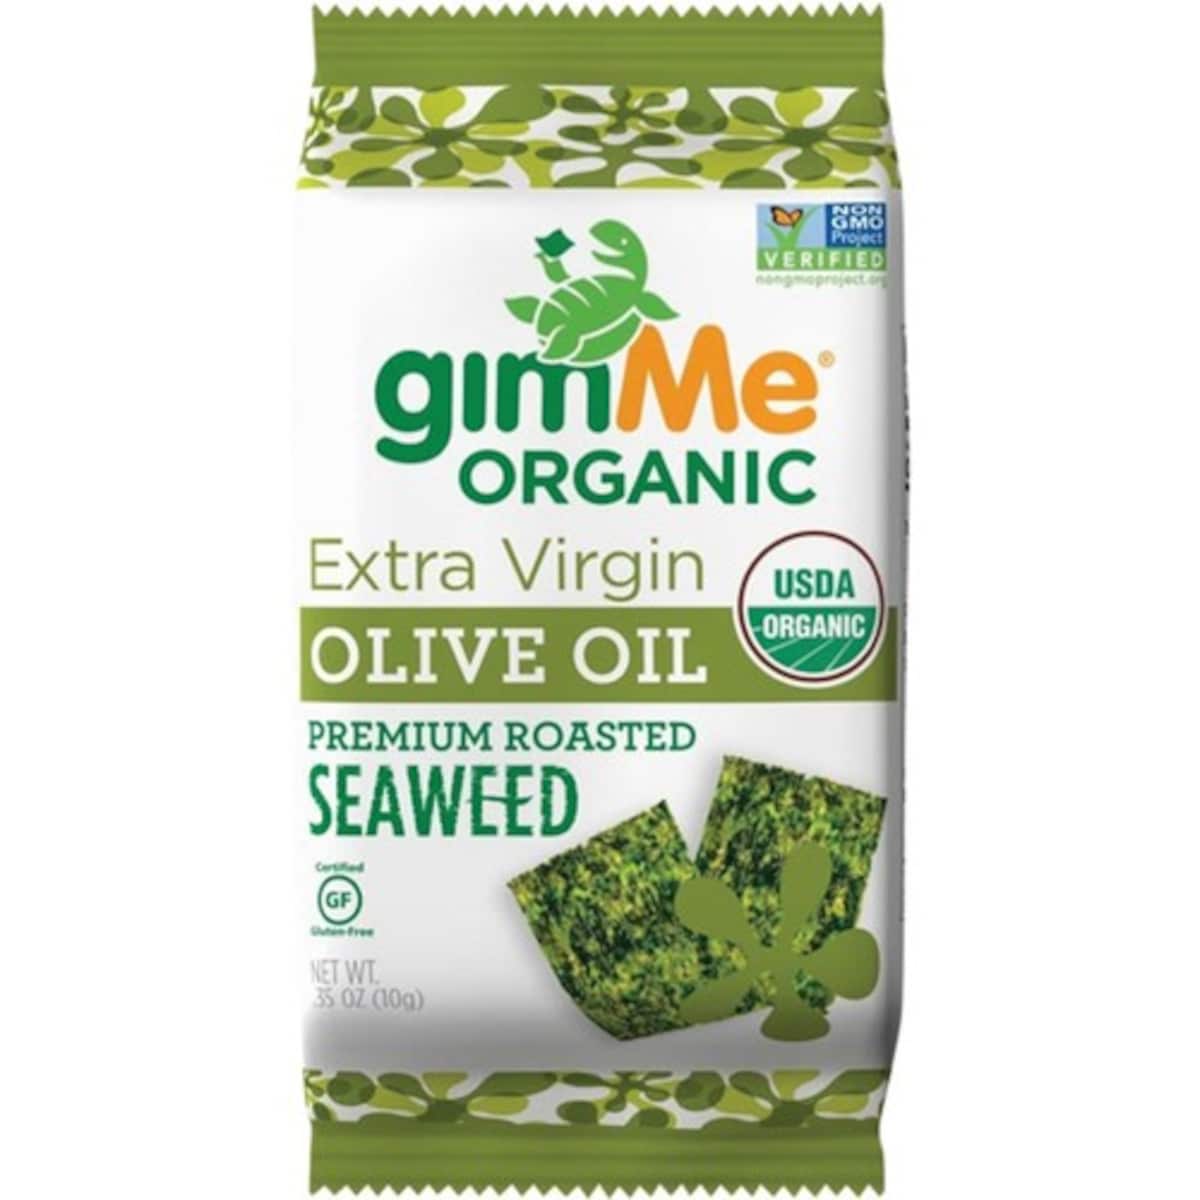 Gimme Organic Roasted  Seaweed Snack Olive Oil 10g